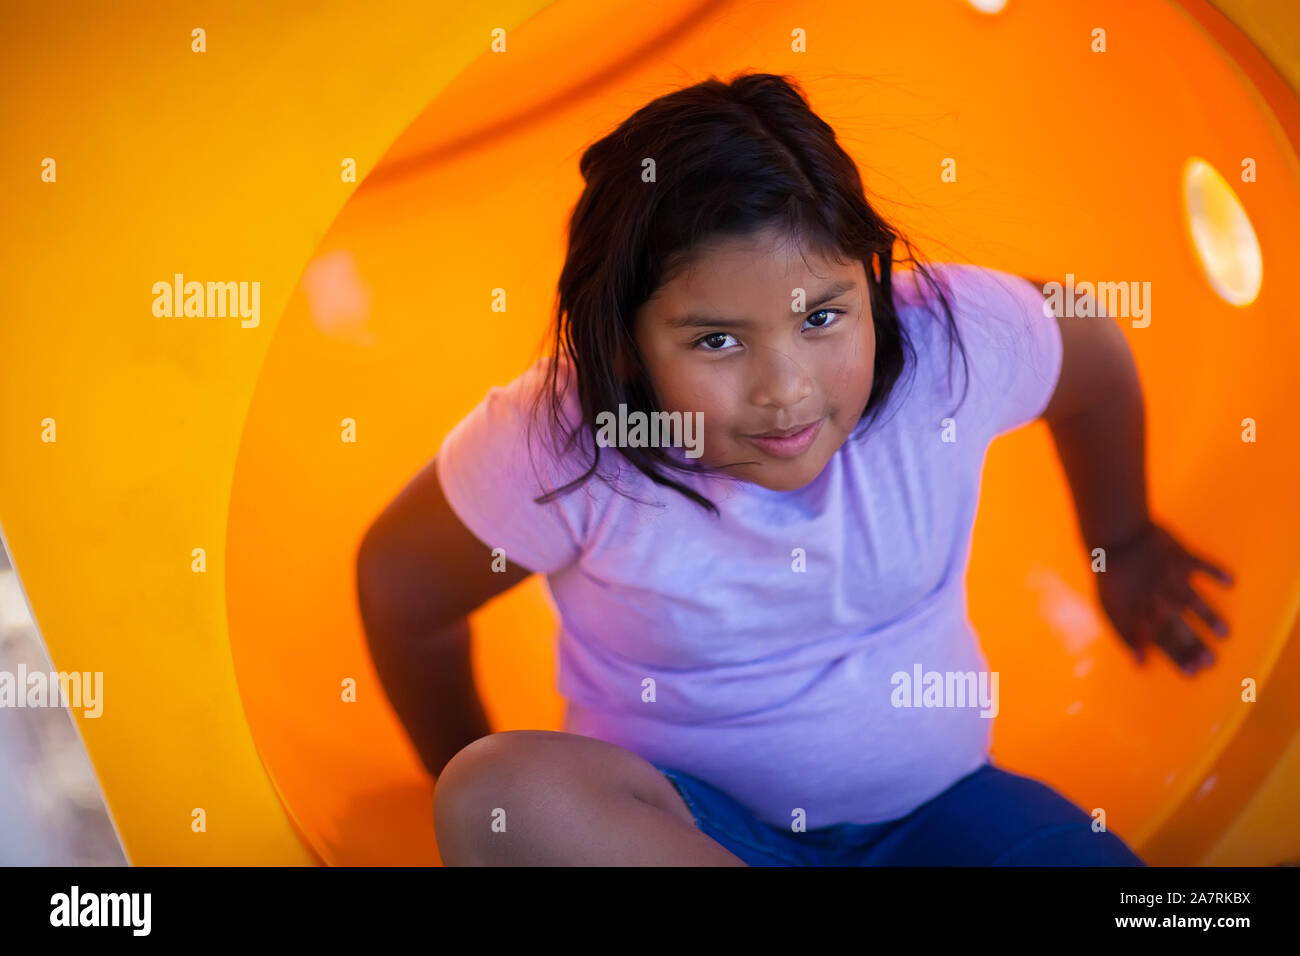 A pretty young girl getting out of a playground slide with a smile. Stock Photo